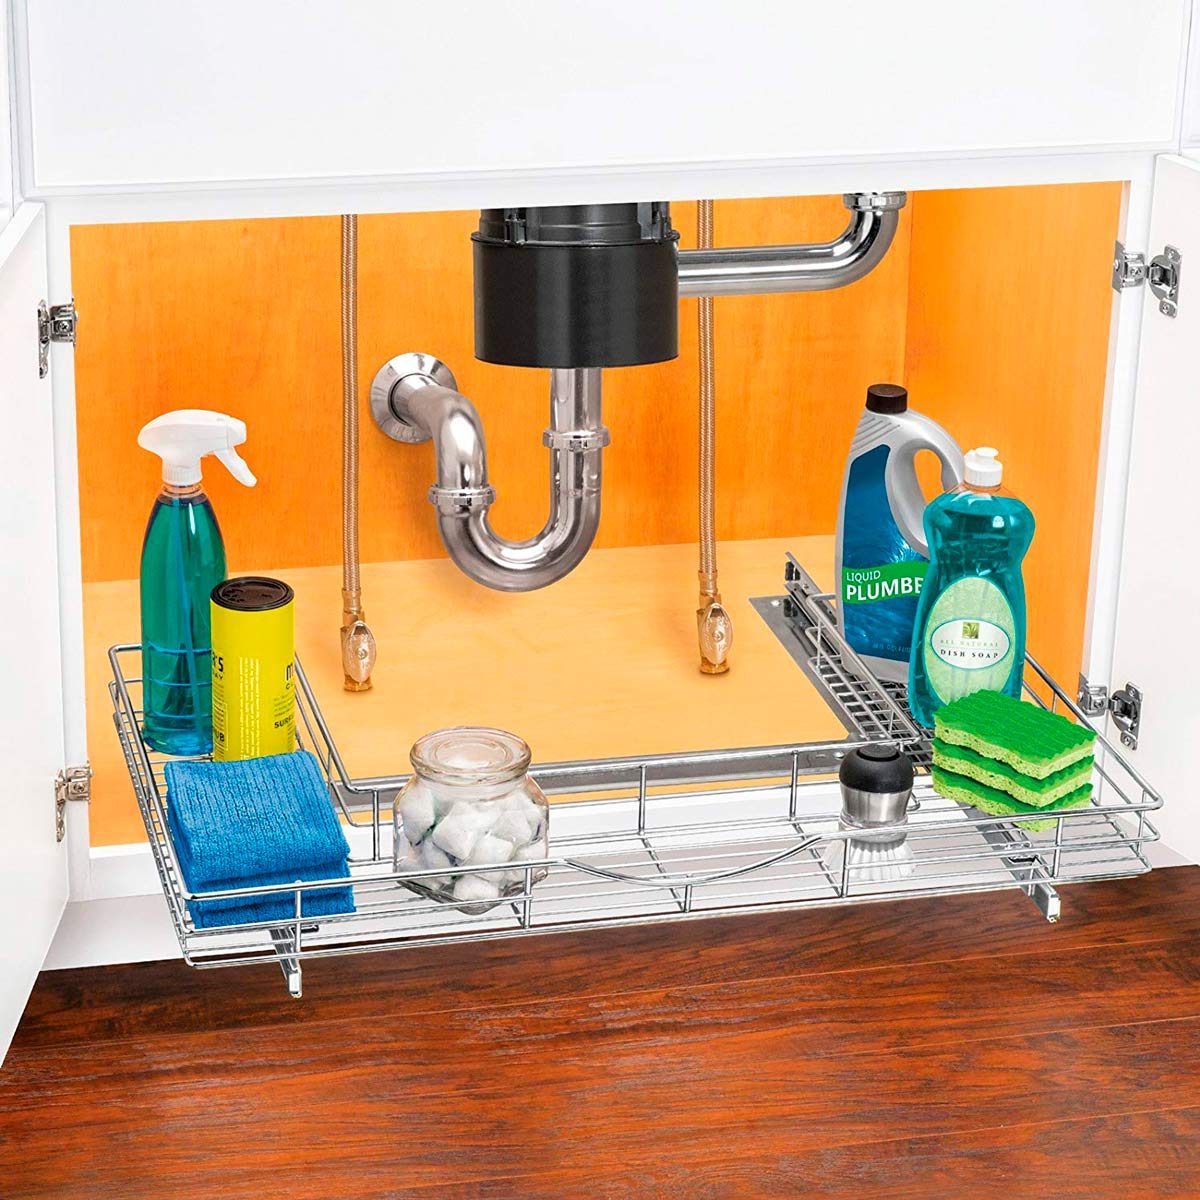 Lynk Professional Slide Out Under Sink Cabinet Organizer - Pull Out Two